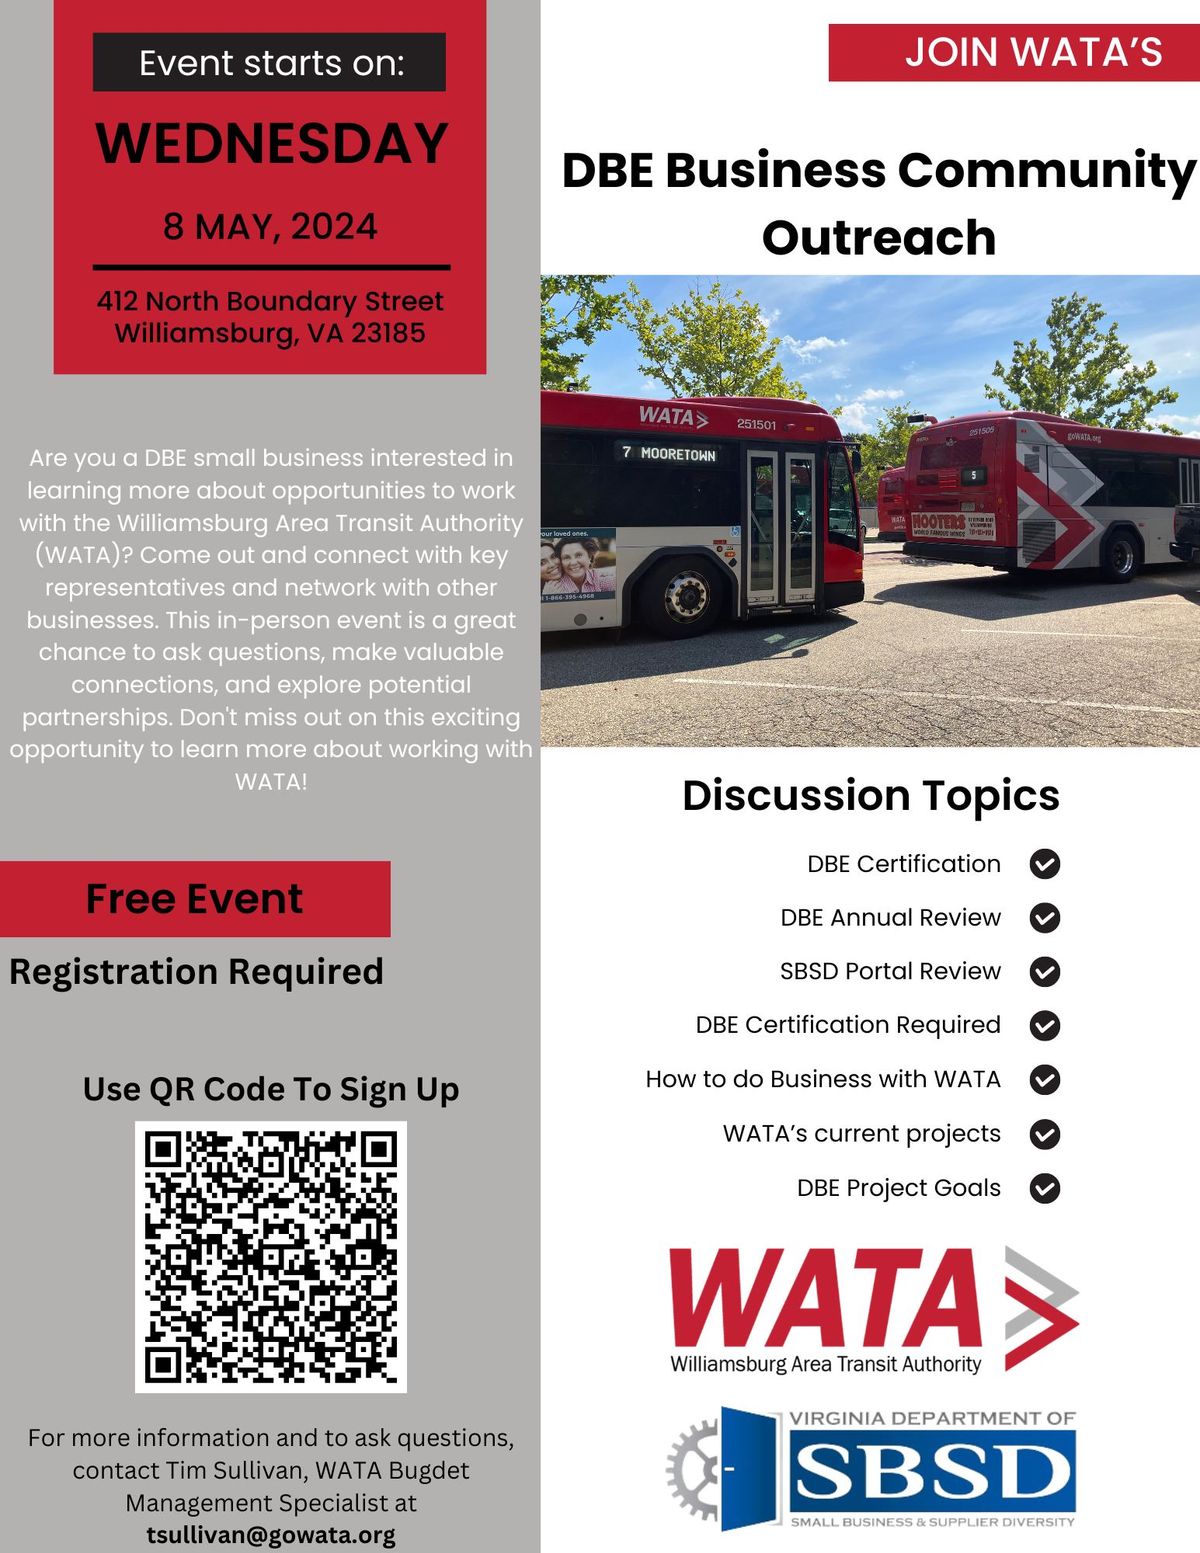 DBE Outreach Event with Williamsburg Area Transit Authority (WATA)